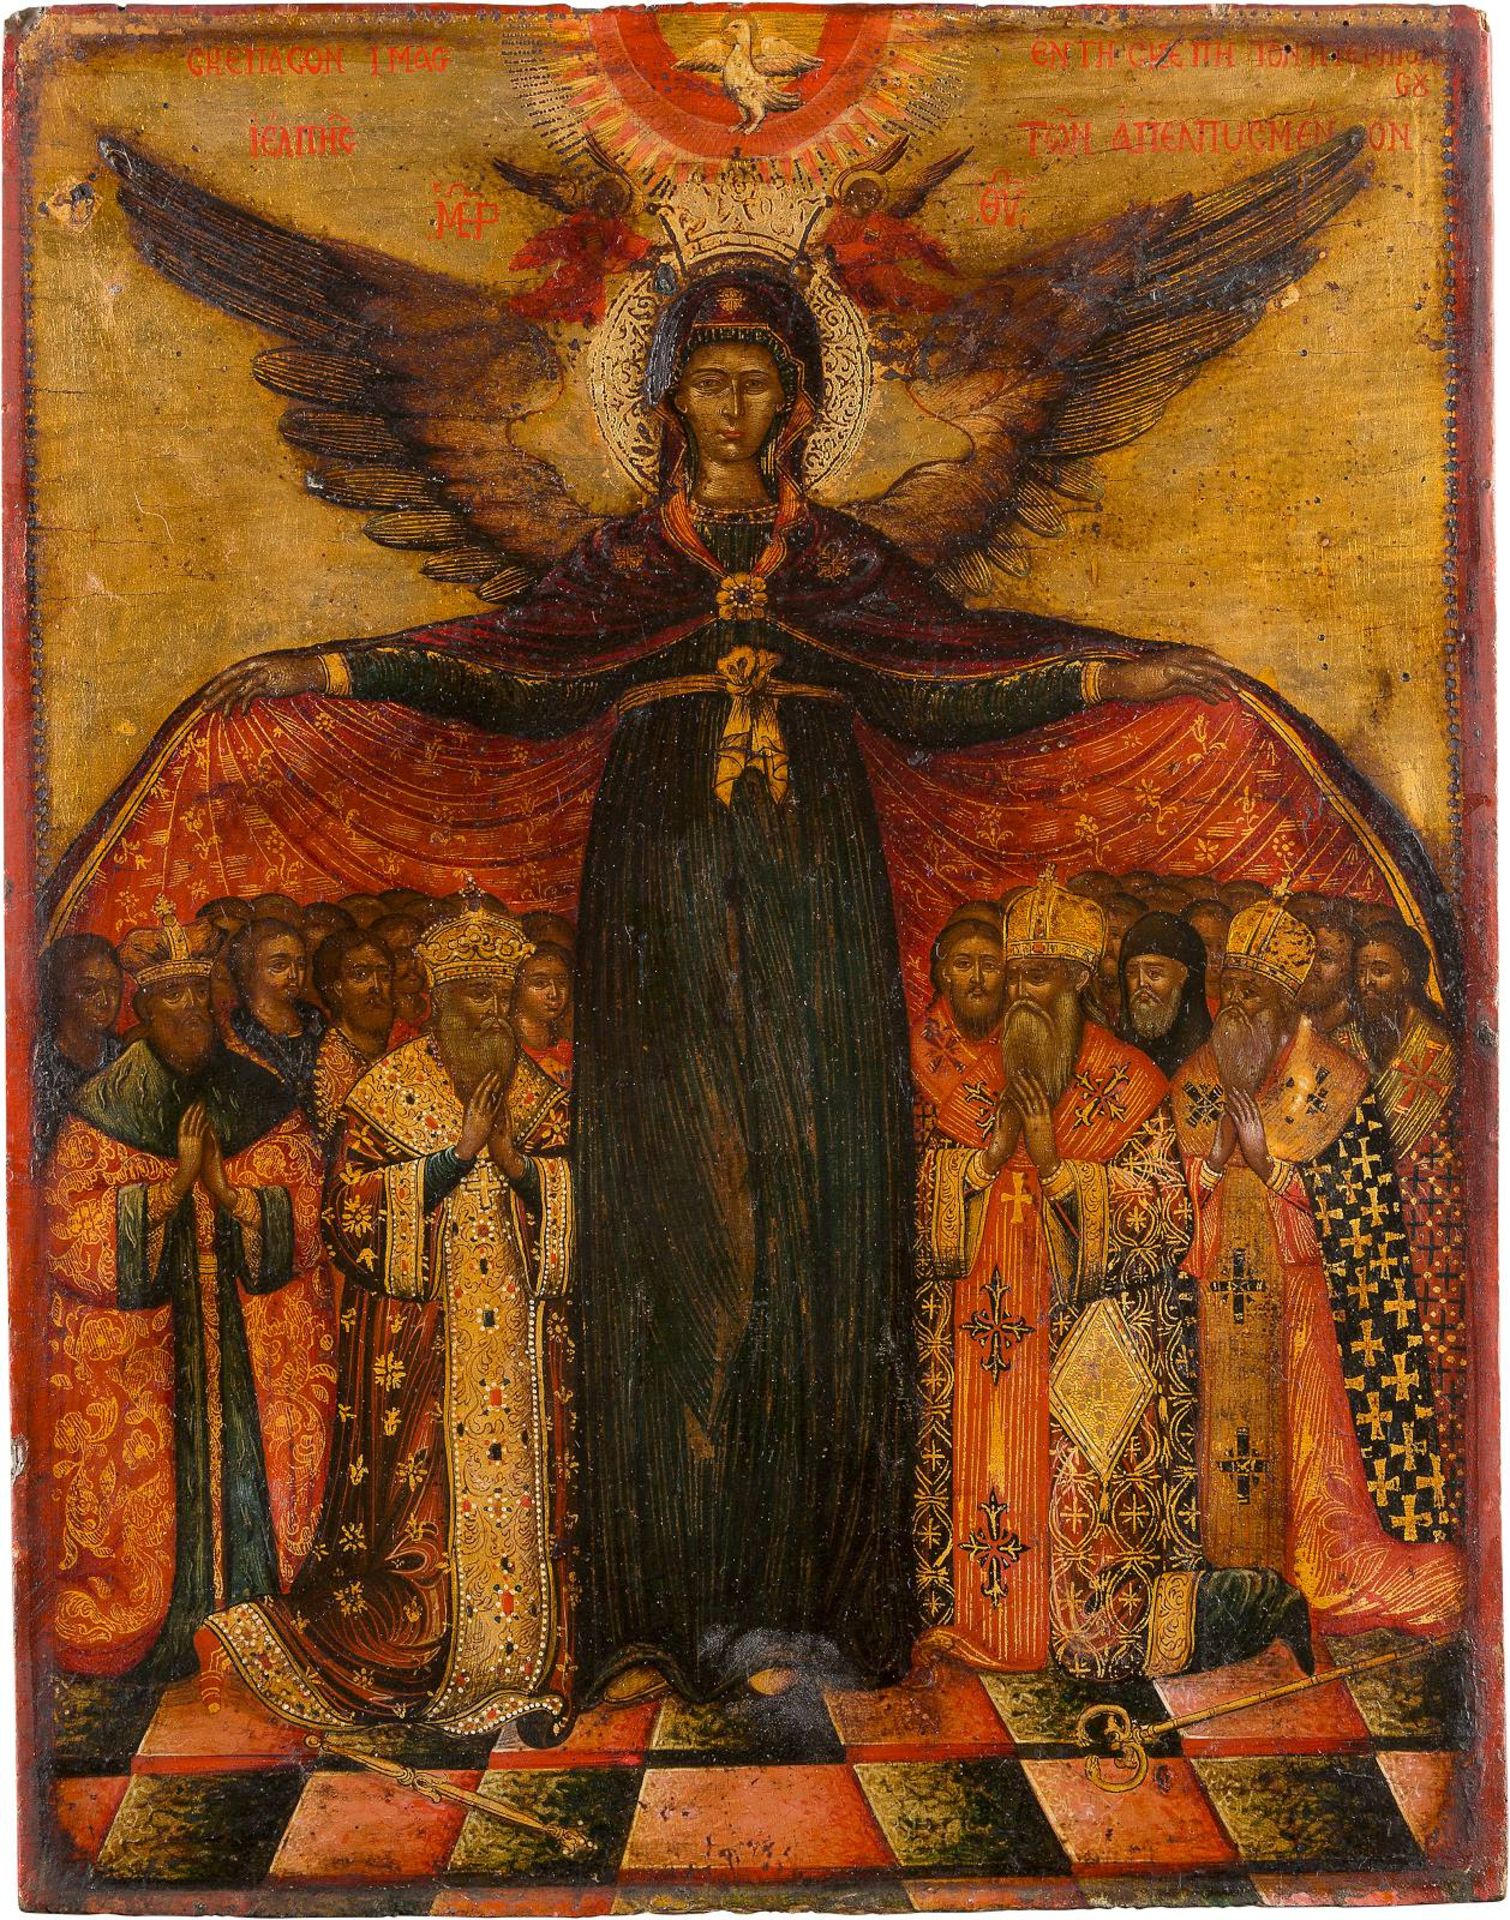 A VERY RARE AND LARGE ICON SHOWING THE VIRGIN OF MERCYGreek, 18th century Tempera on wood panel. The